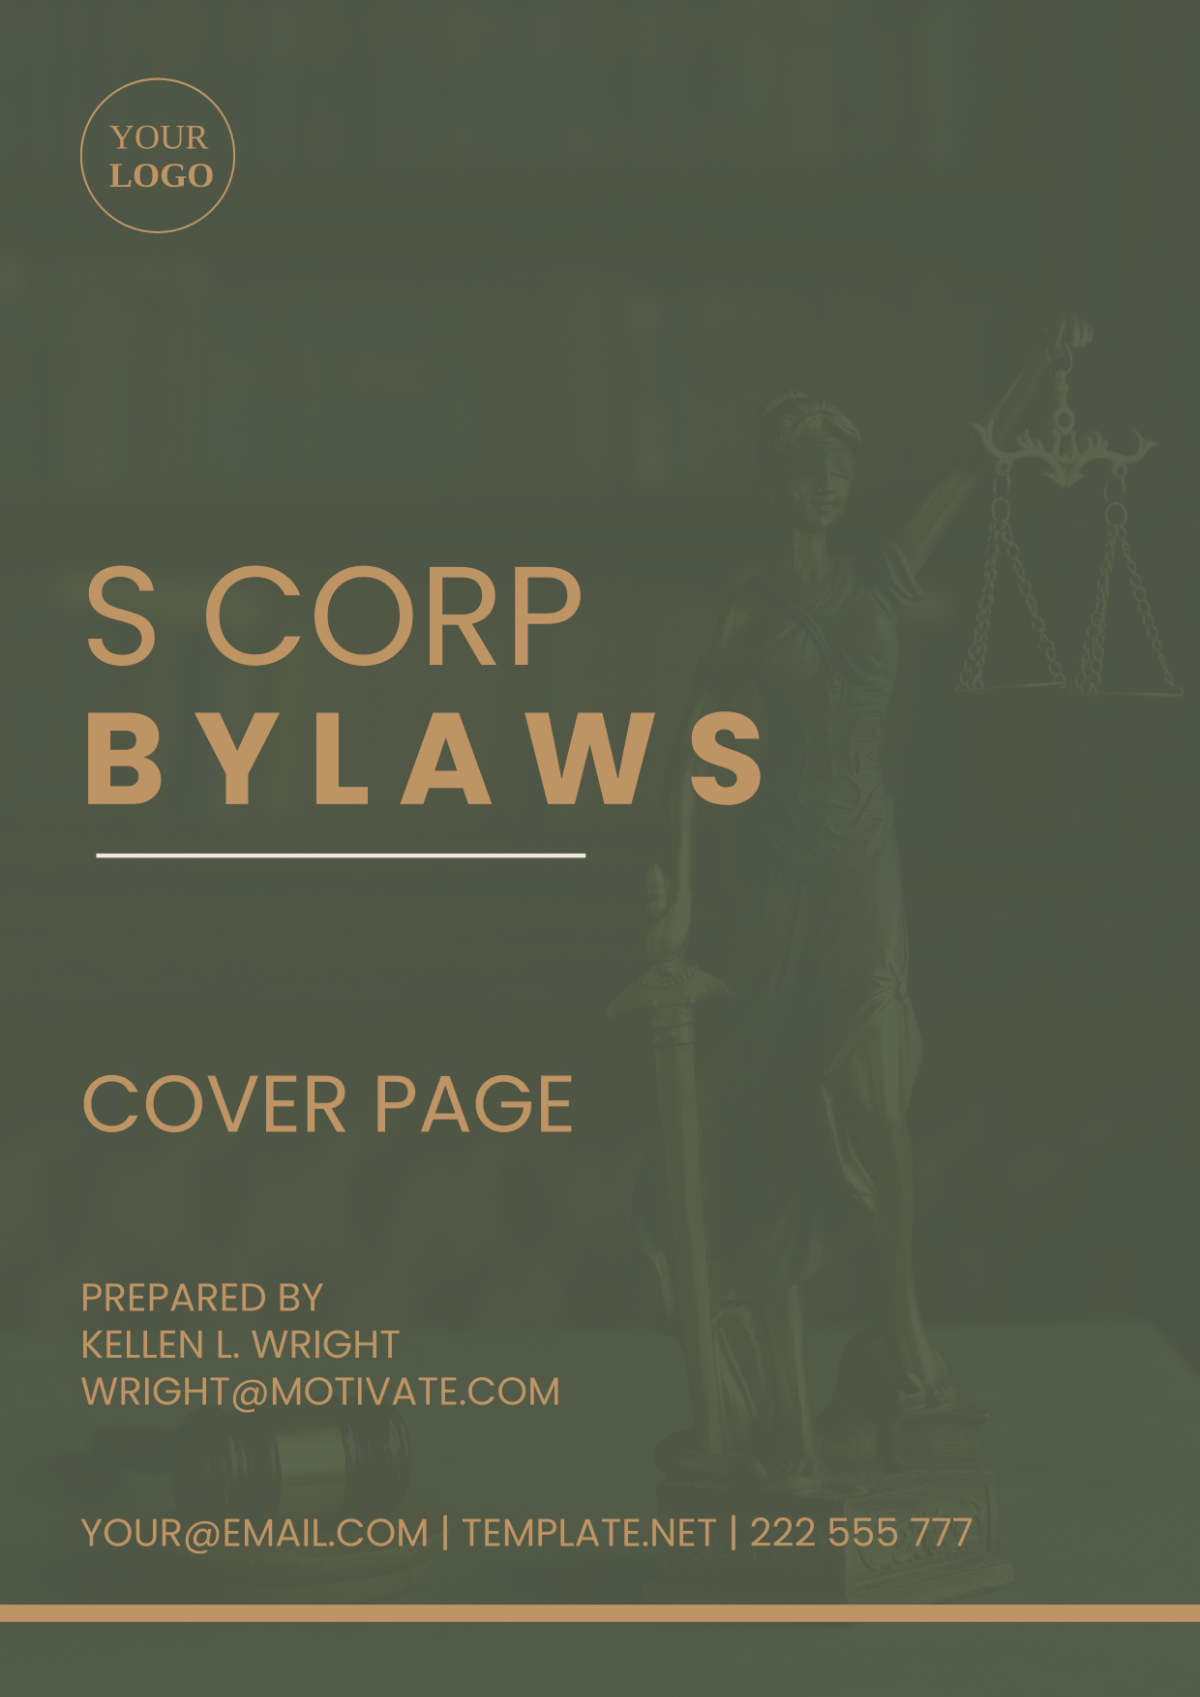 S Corp Bylaws Cover Page Template